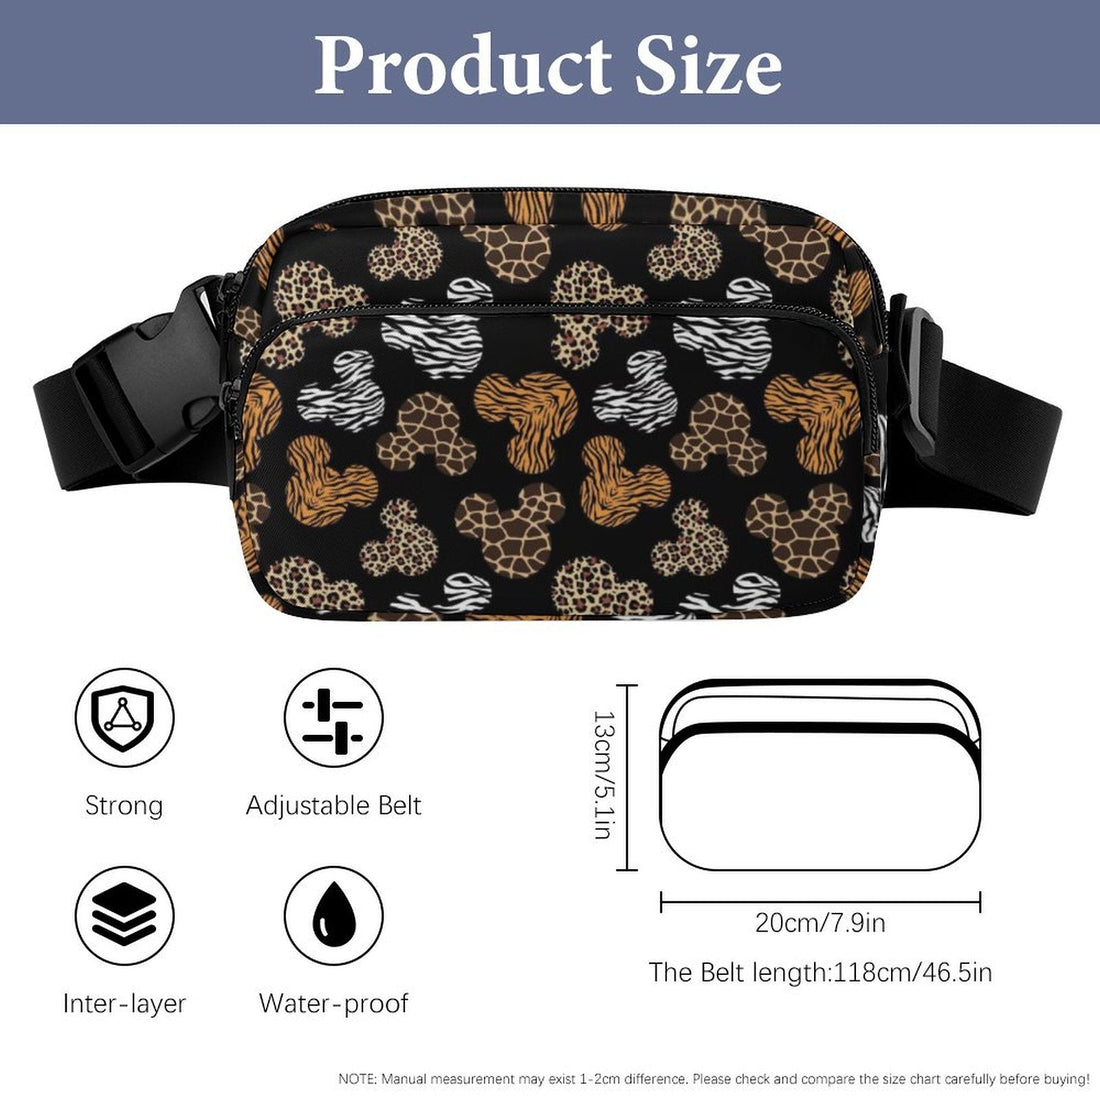 Safari Mouse Fanny Pack- PREORDER